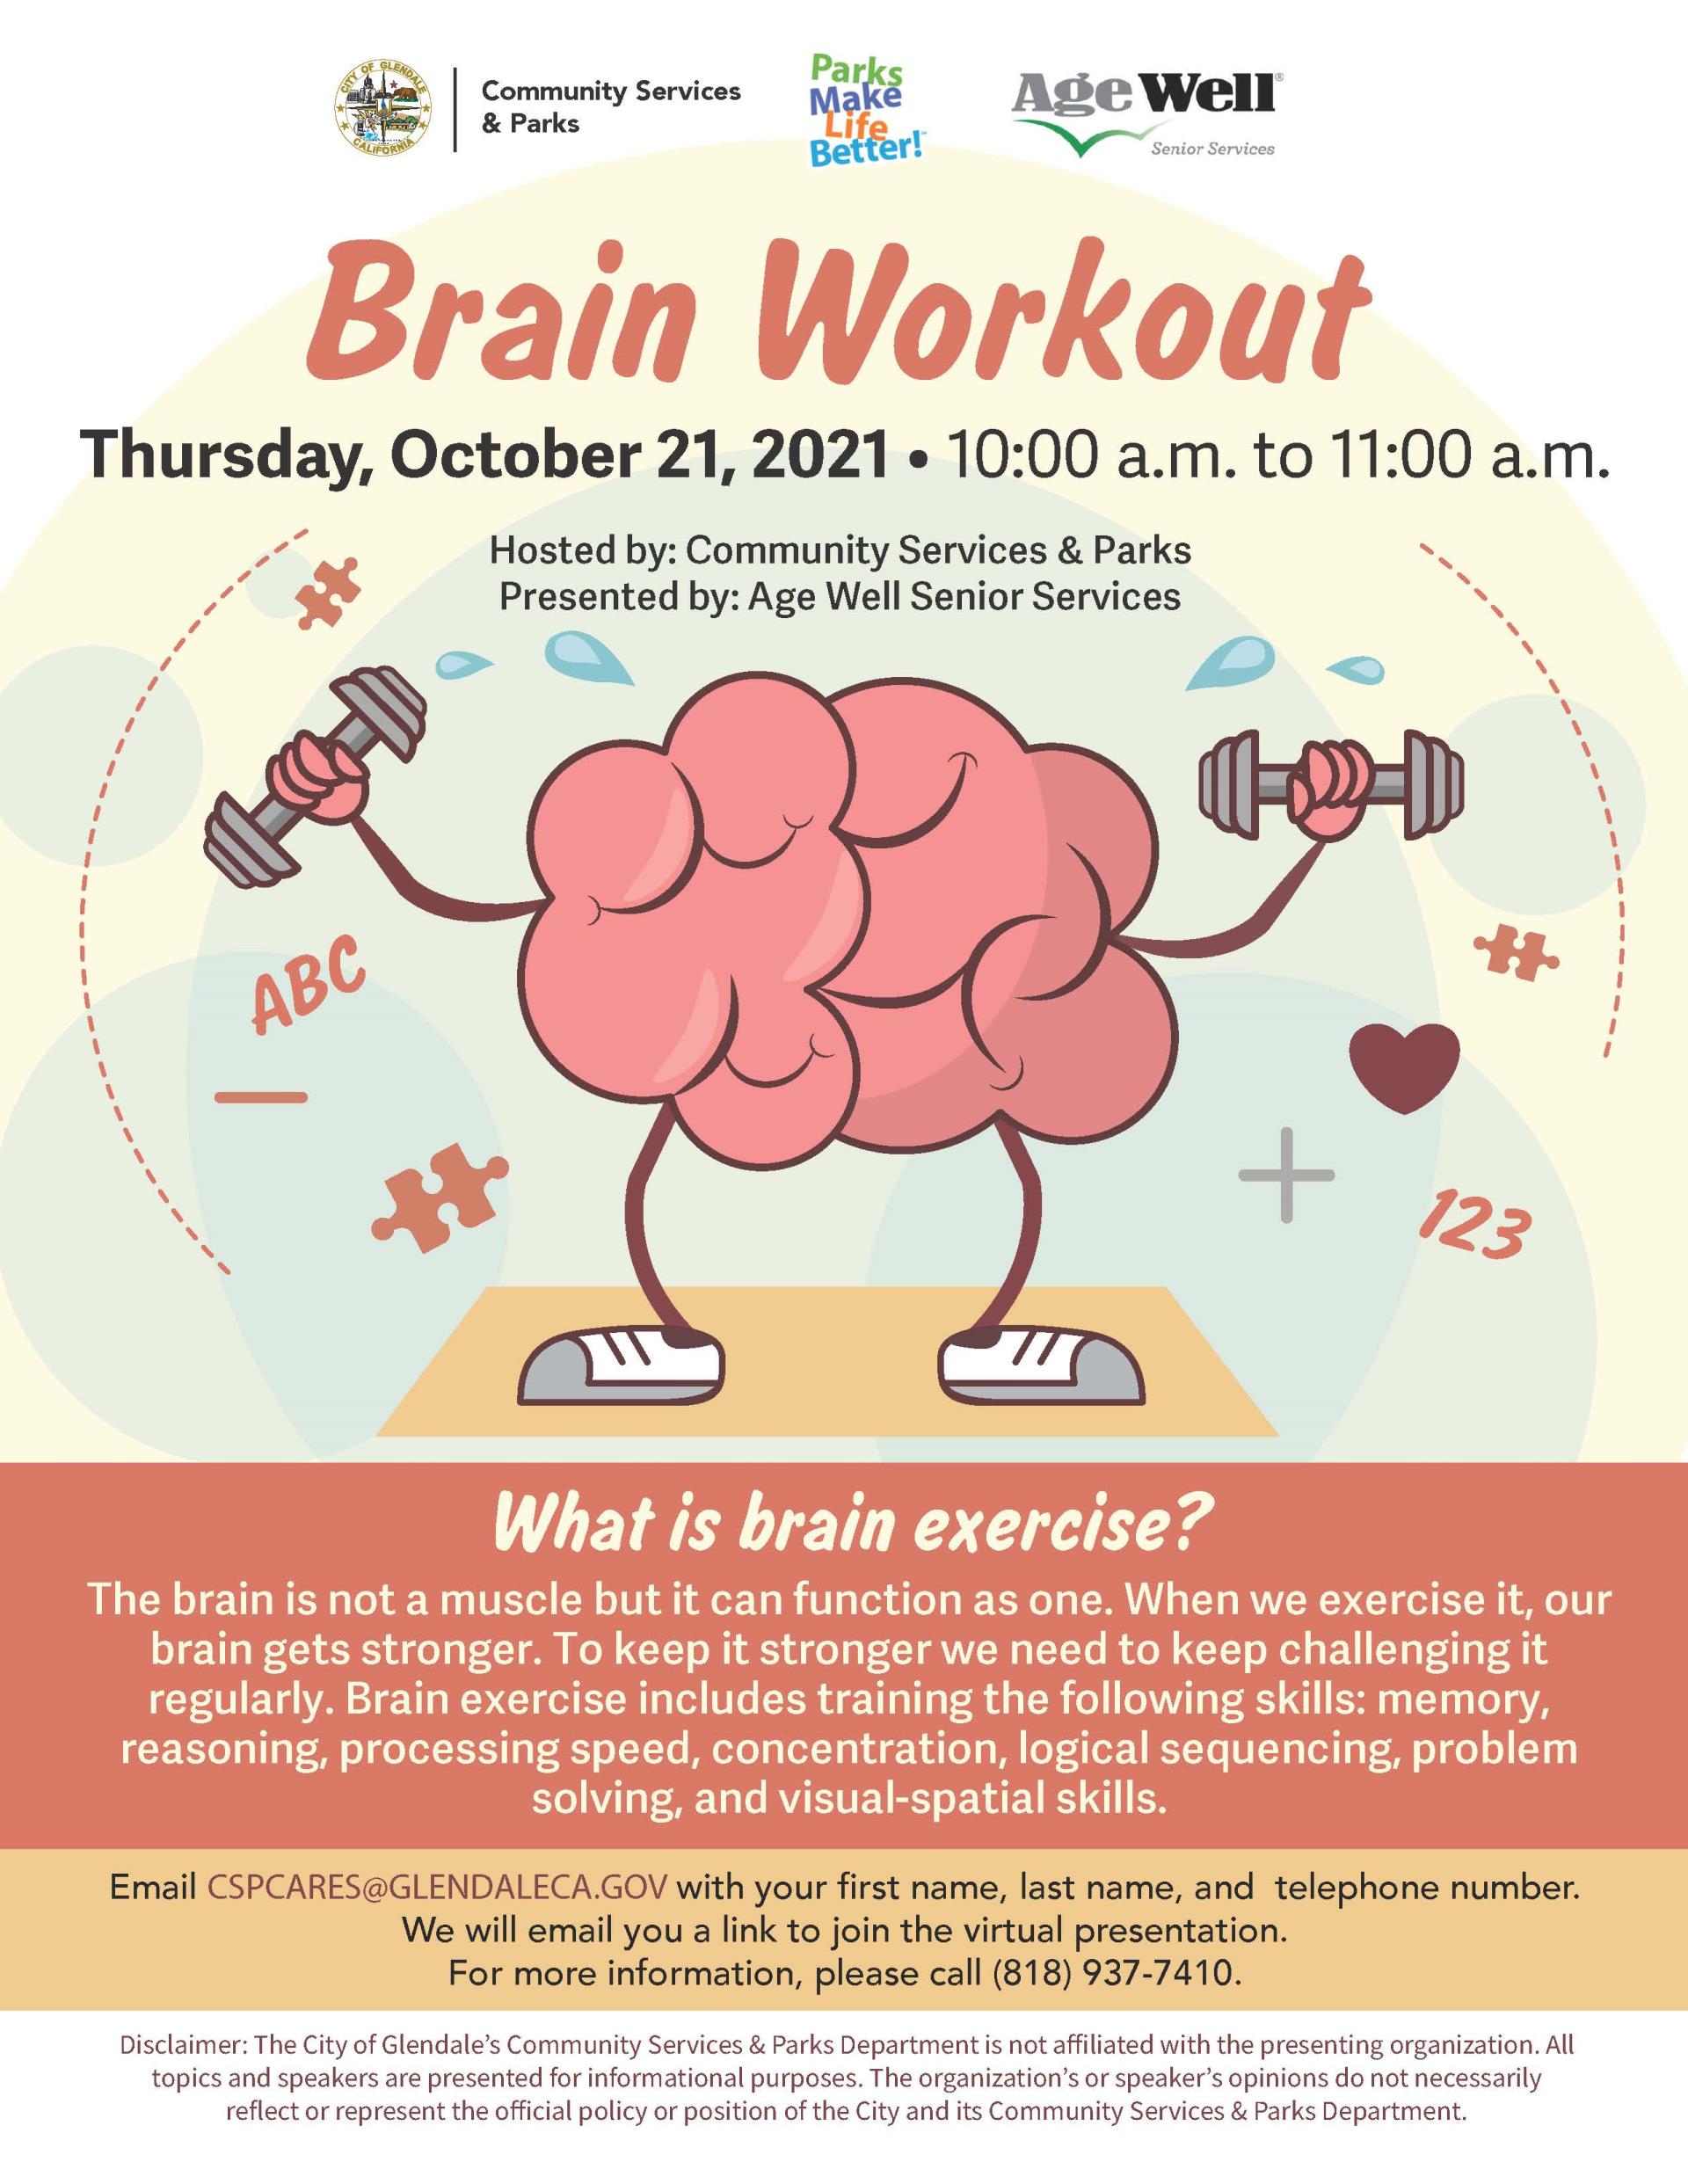 Brain exercise flyer updated 9-16